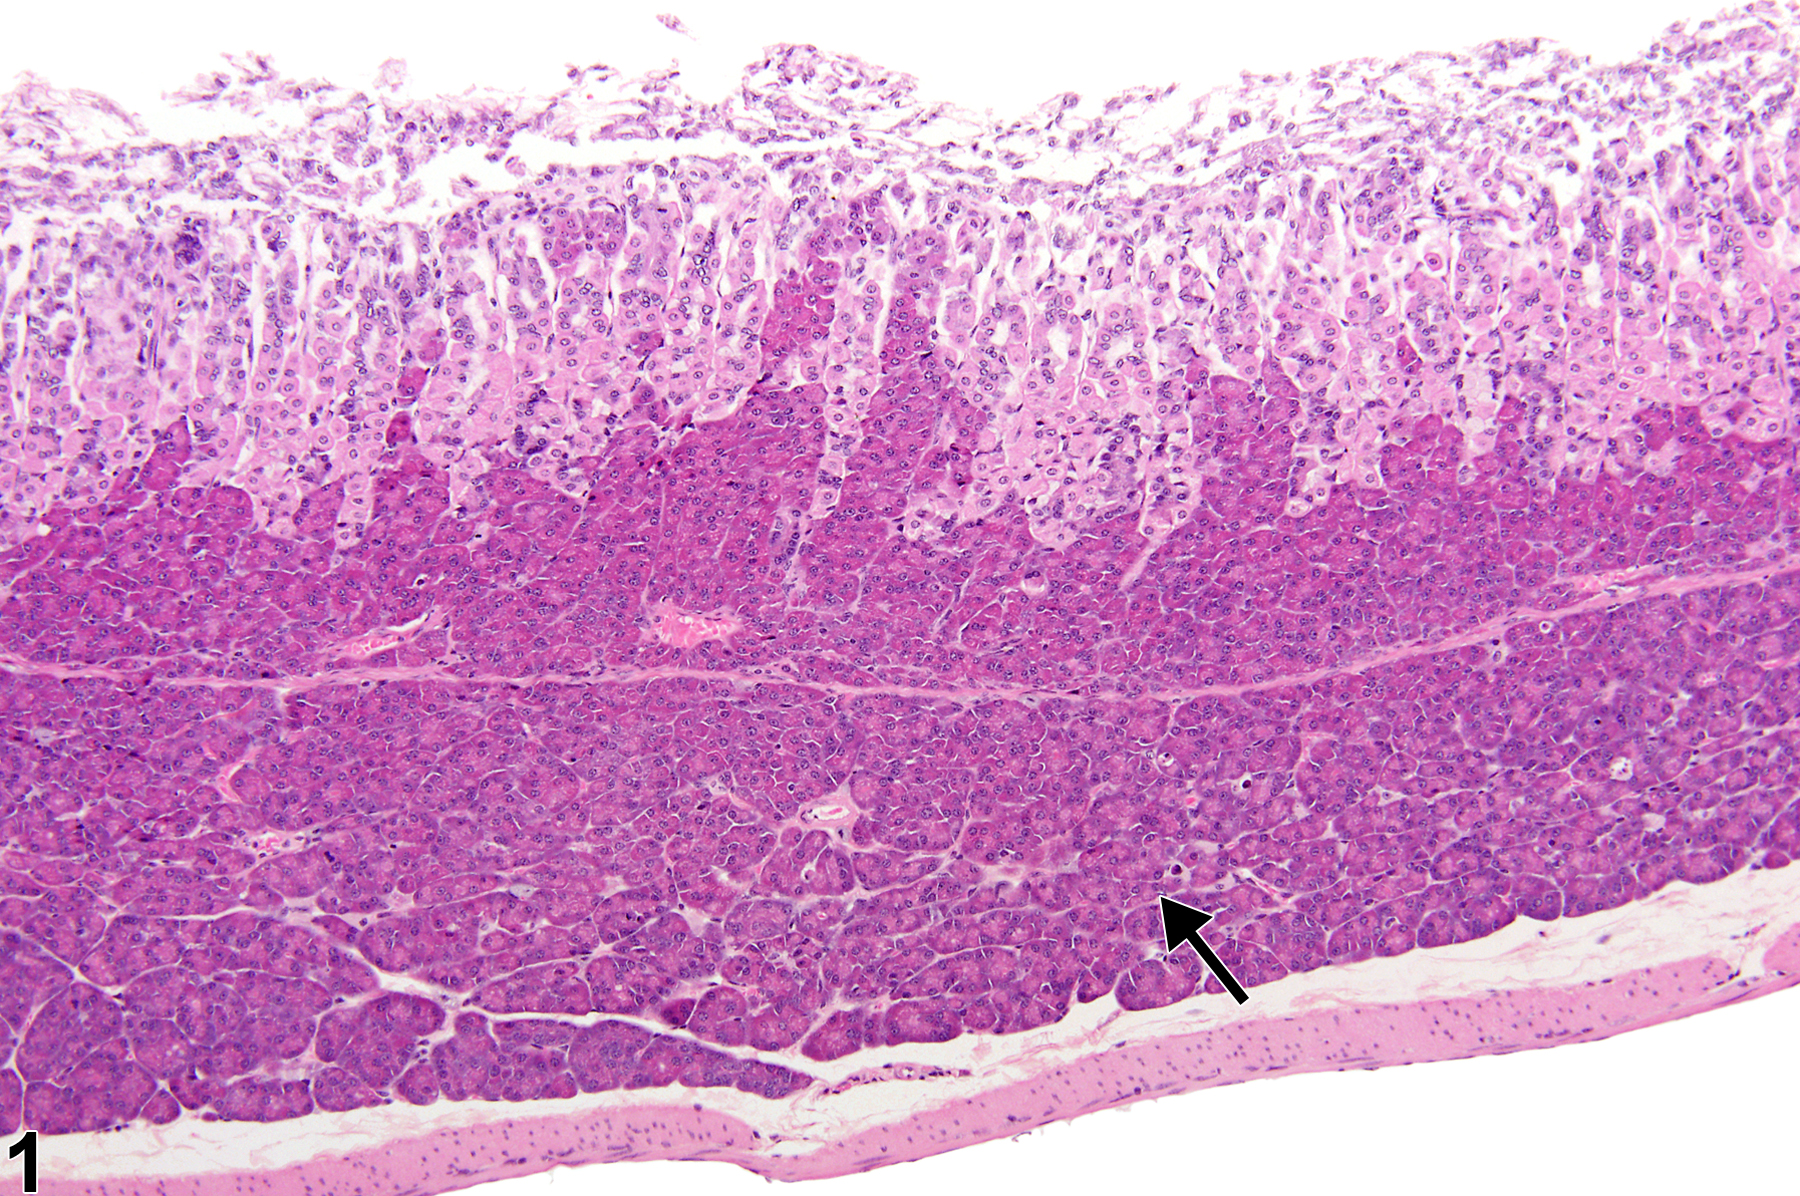 Image of ectopic tissue (pancreas) in the glandular stomach from a female B6C3F1 mouse in a chronic study